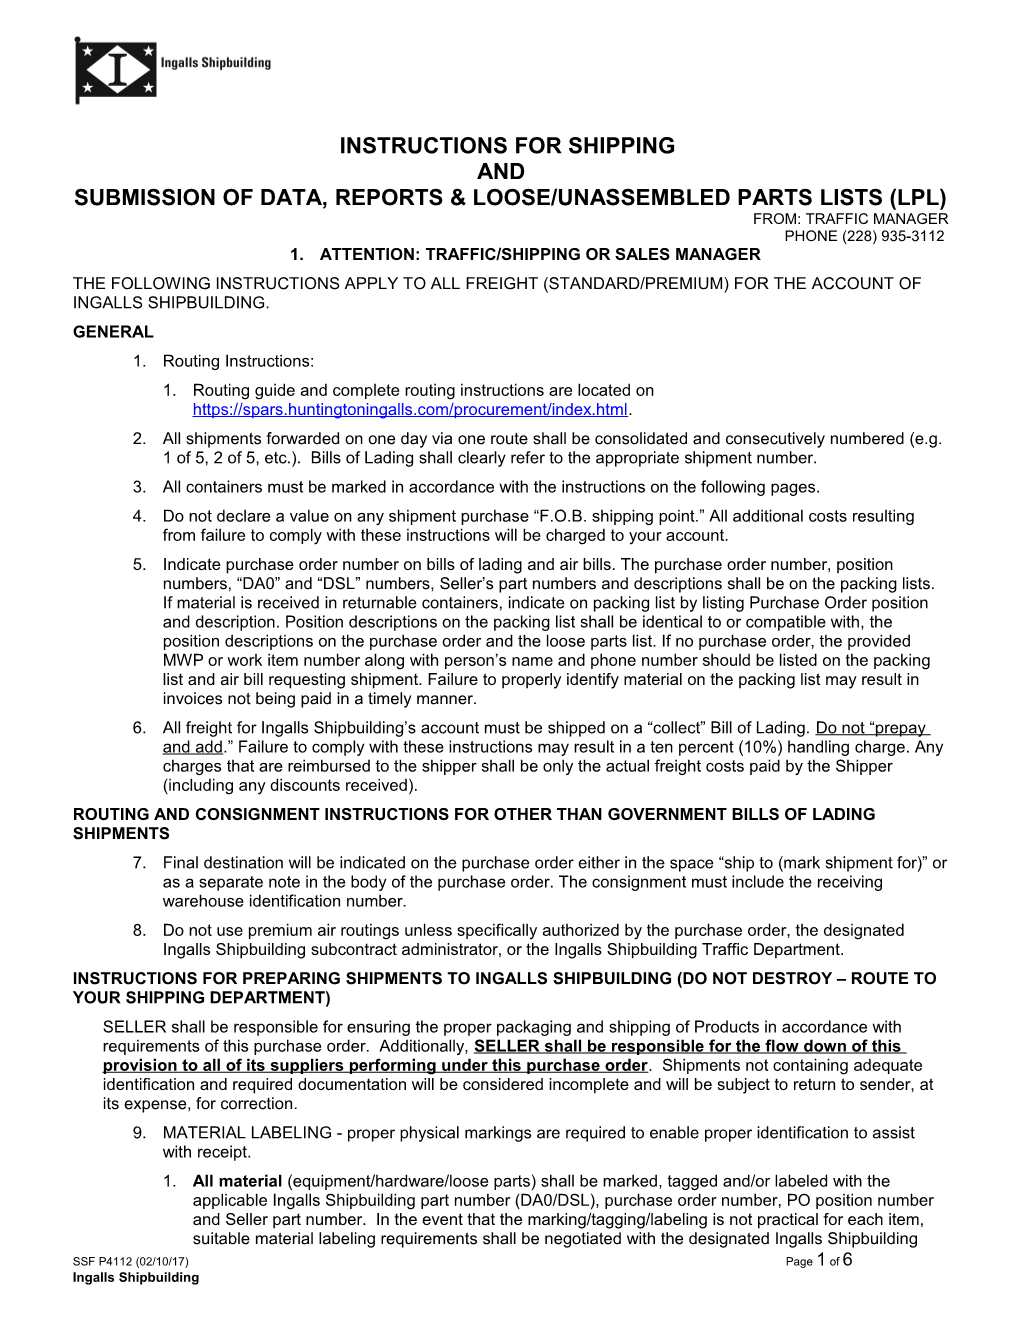 Submission of Data, Reports & Loose/Unassembled Parts Lists (Lpl)